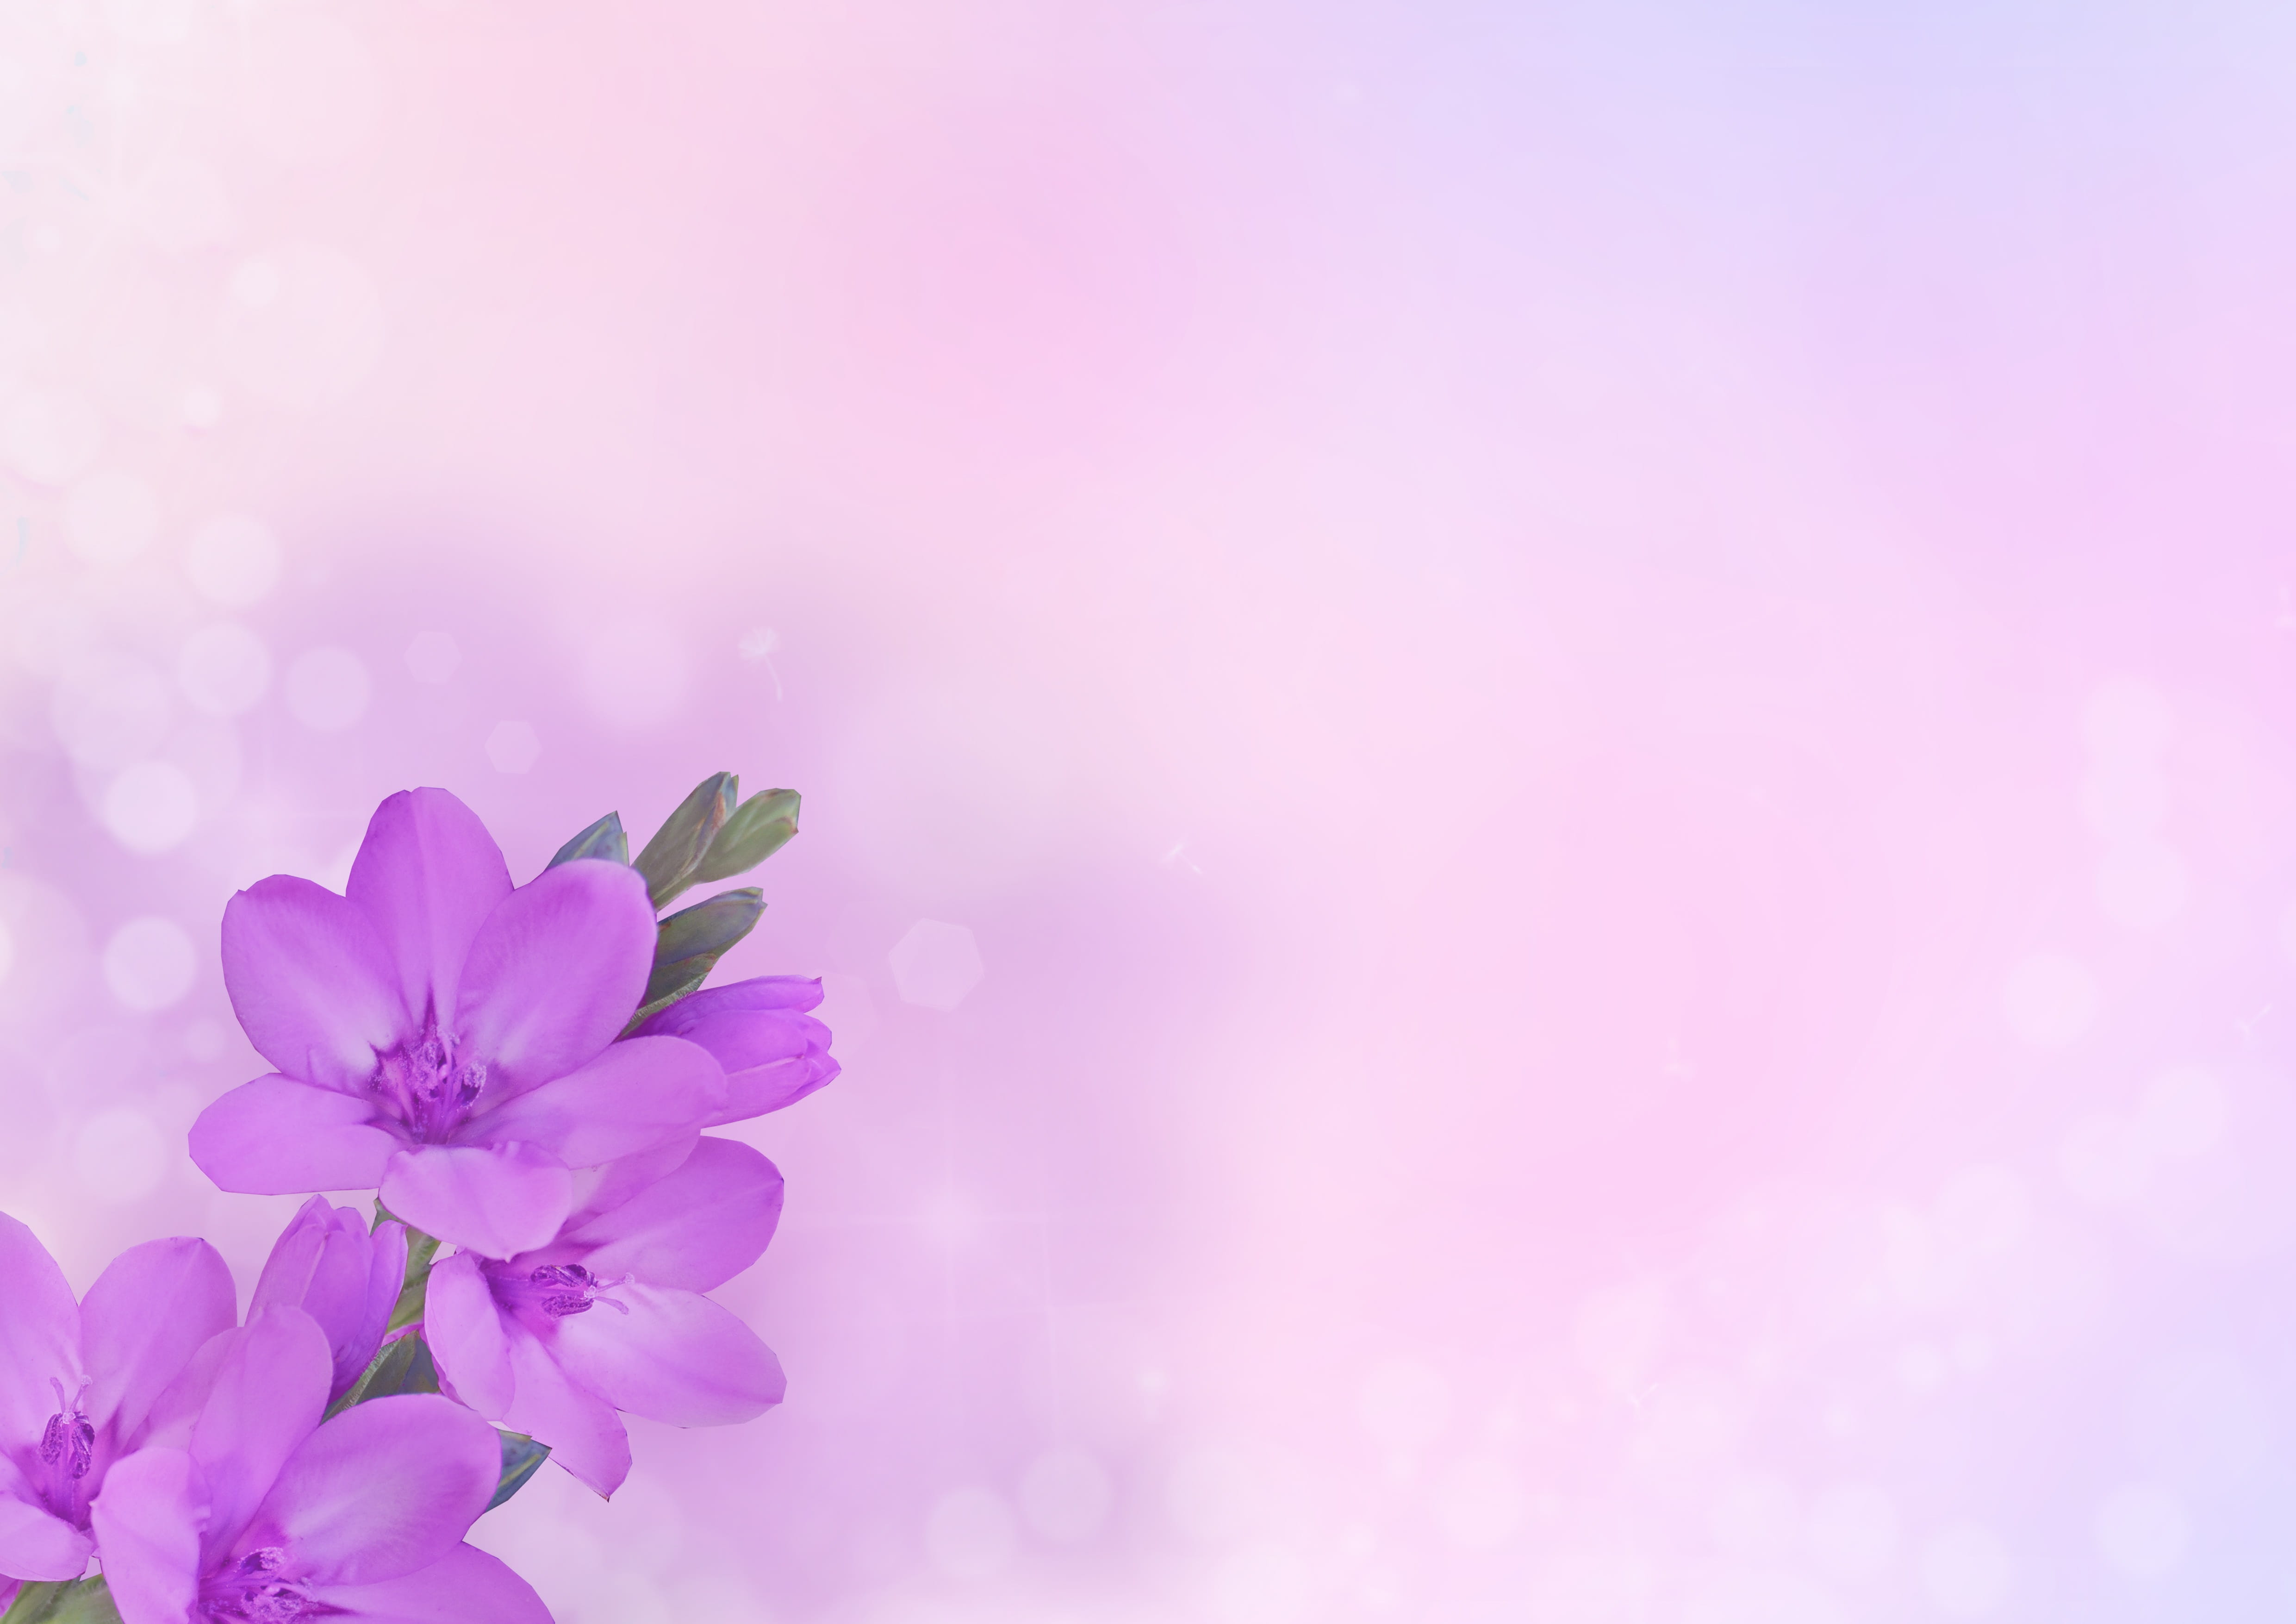 background image, flower, flowers, purple, pink, greeting card